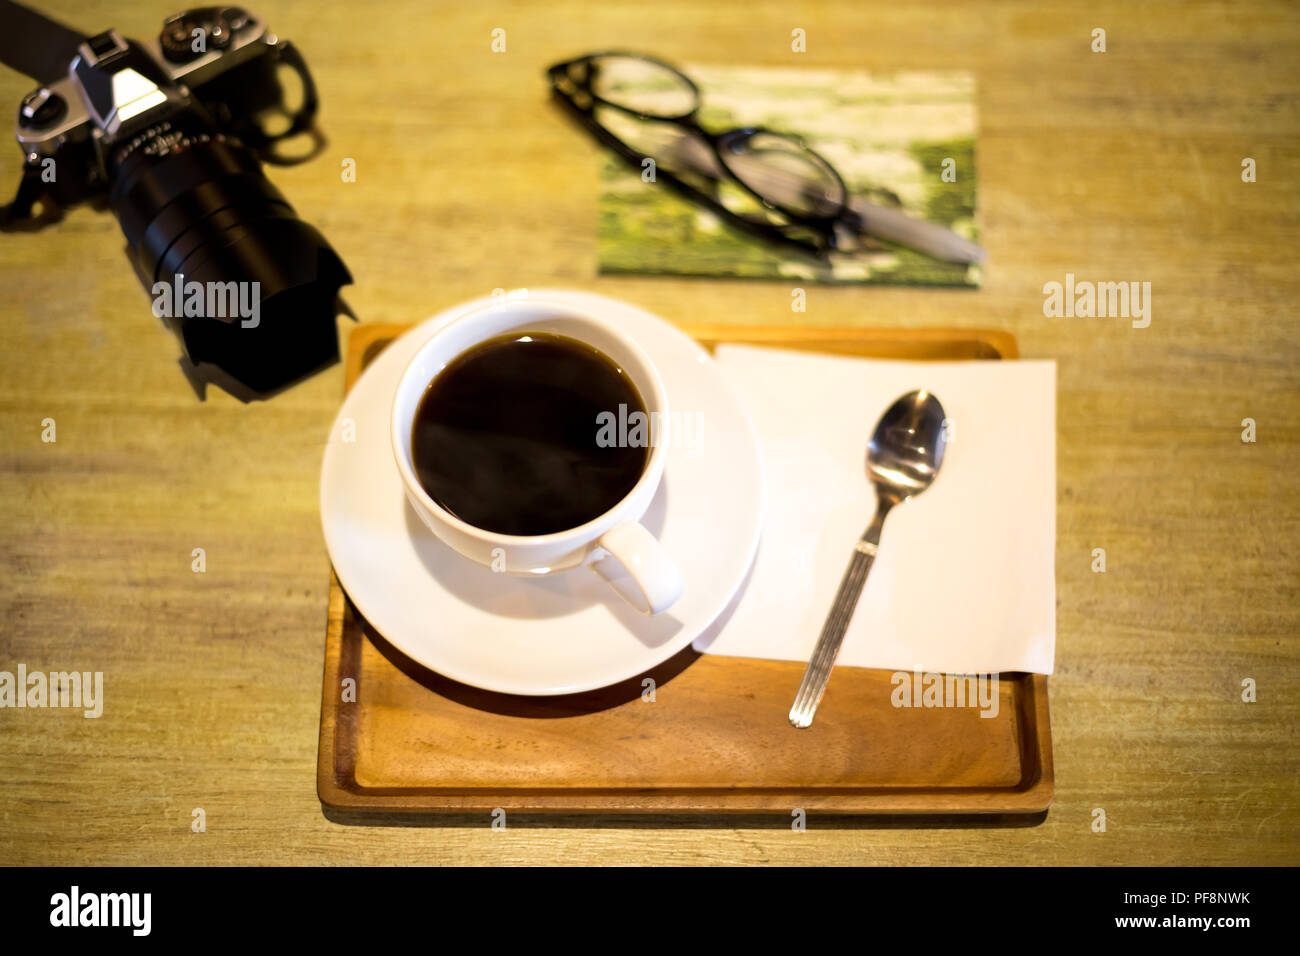 Top view with coffee cup and camera  Stock Photo